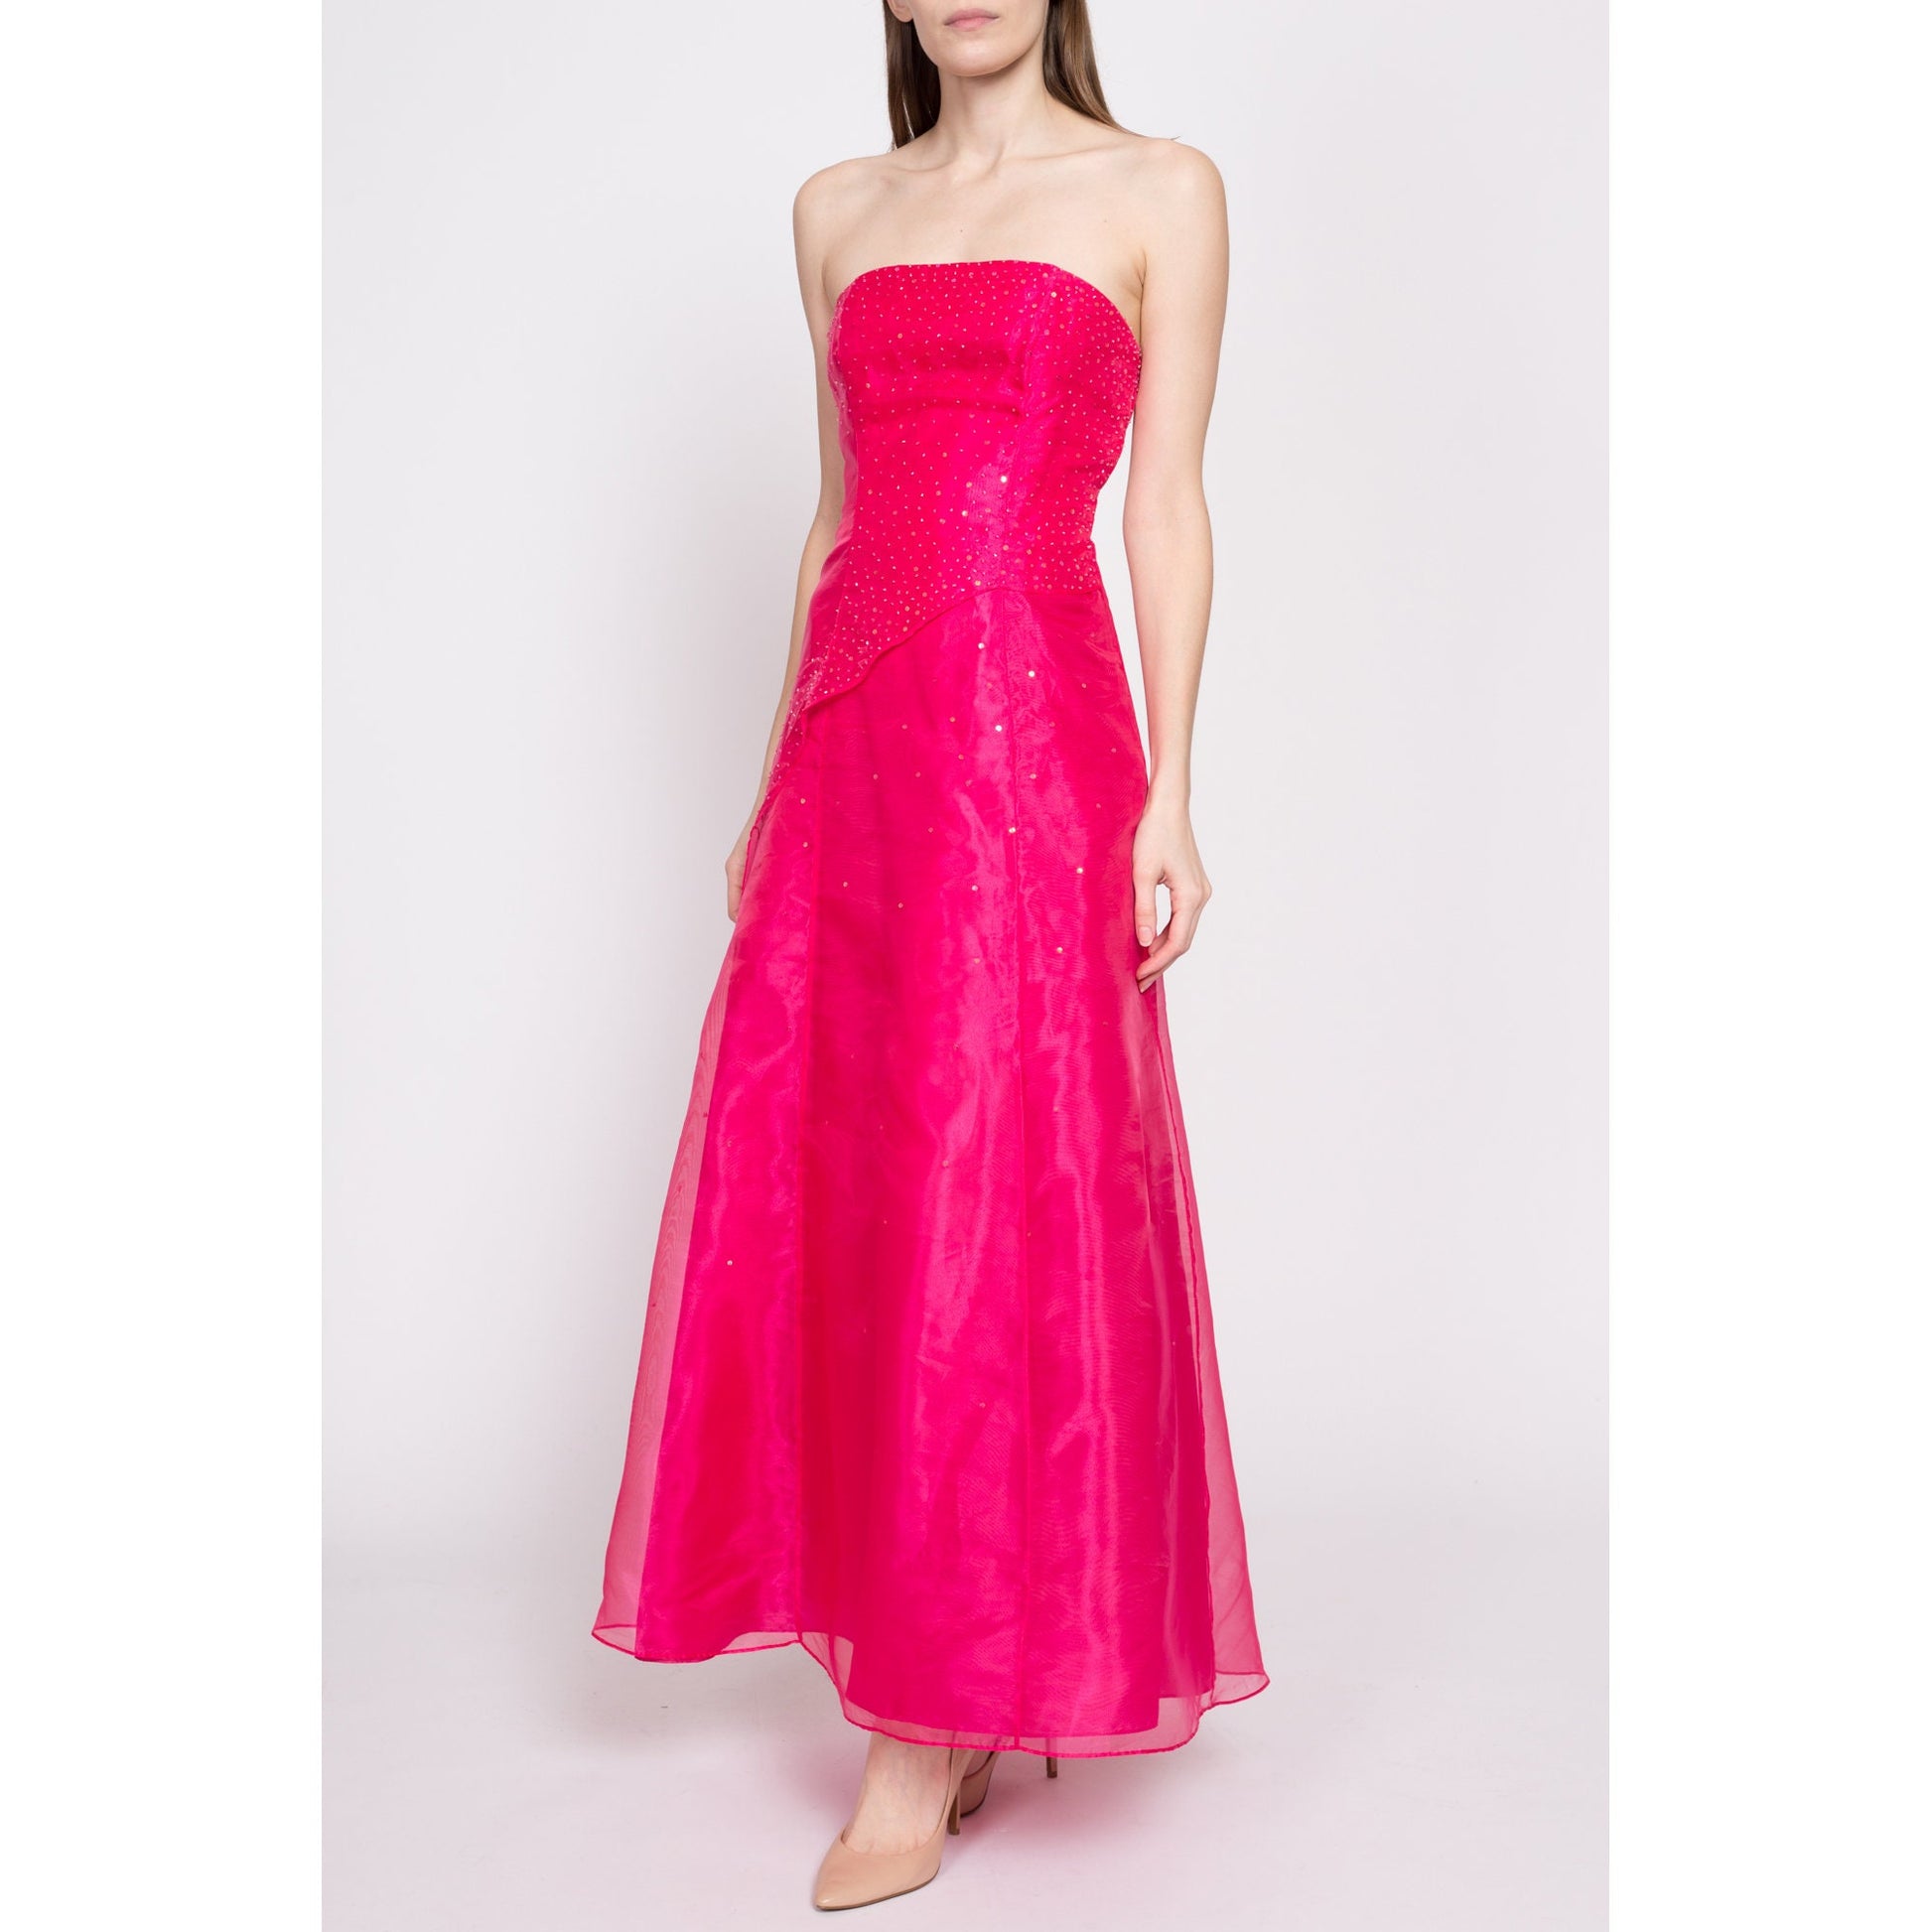 90s Hot Pink Backless Gown - Small | Vintage Sleeveless Strappy Low Back Sequin Formal Maxi Prom Dress